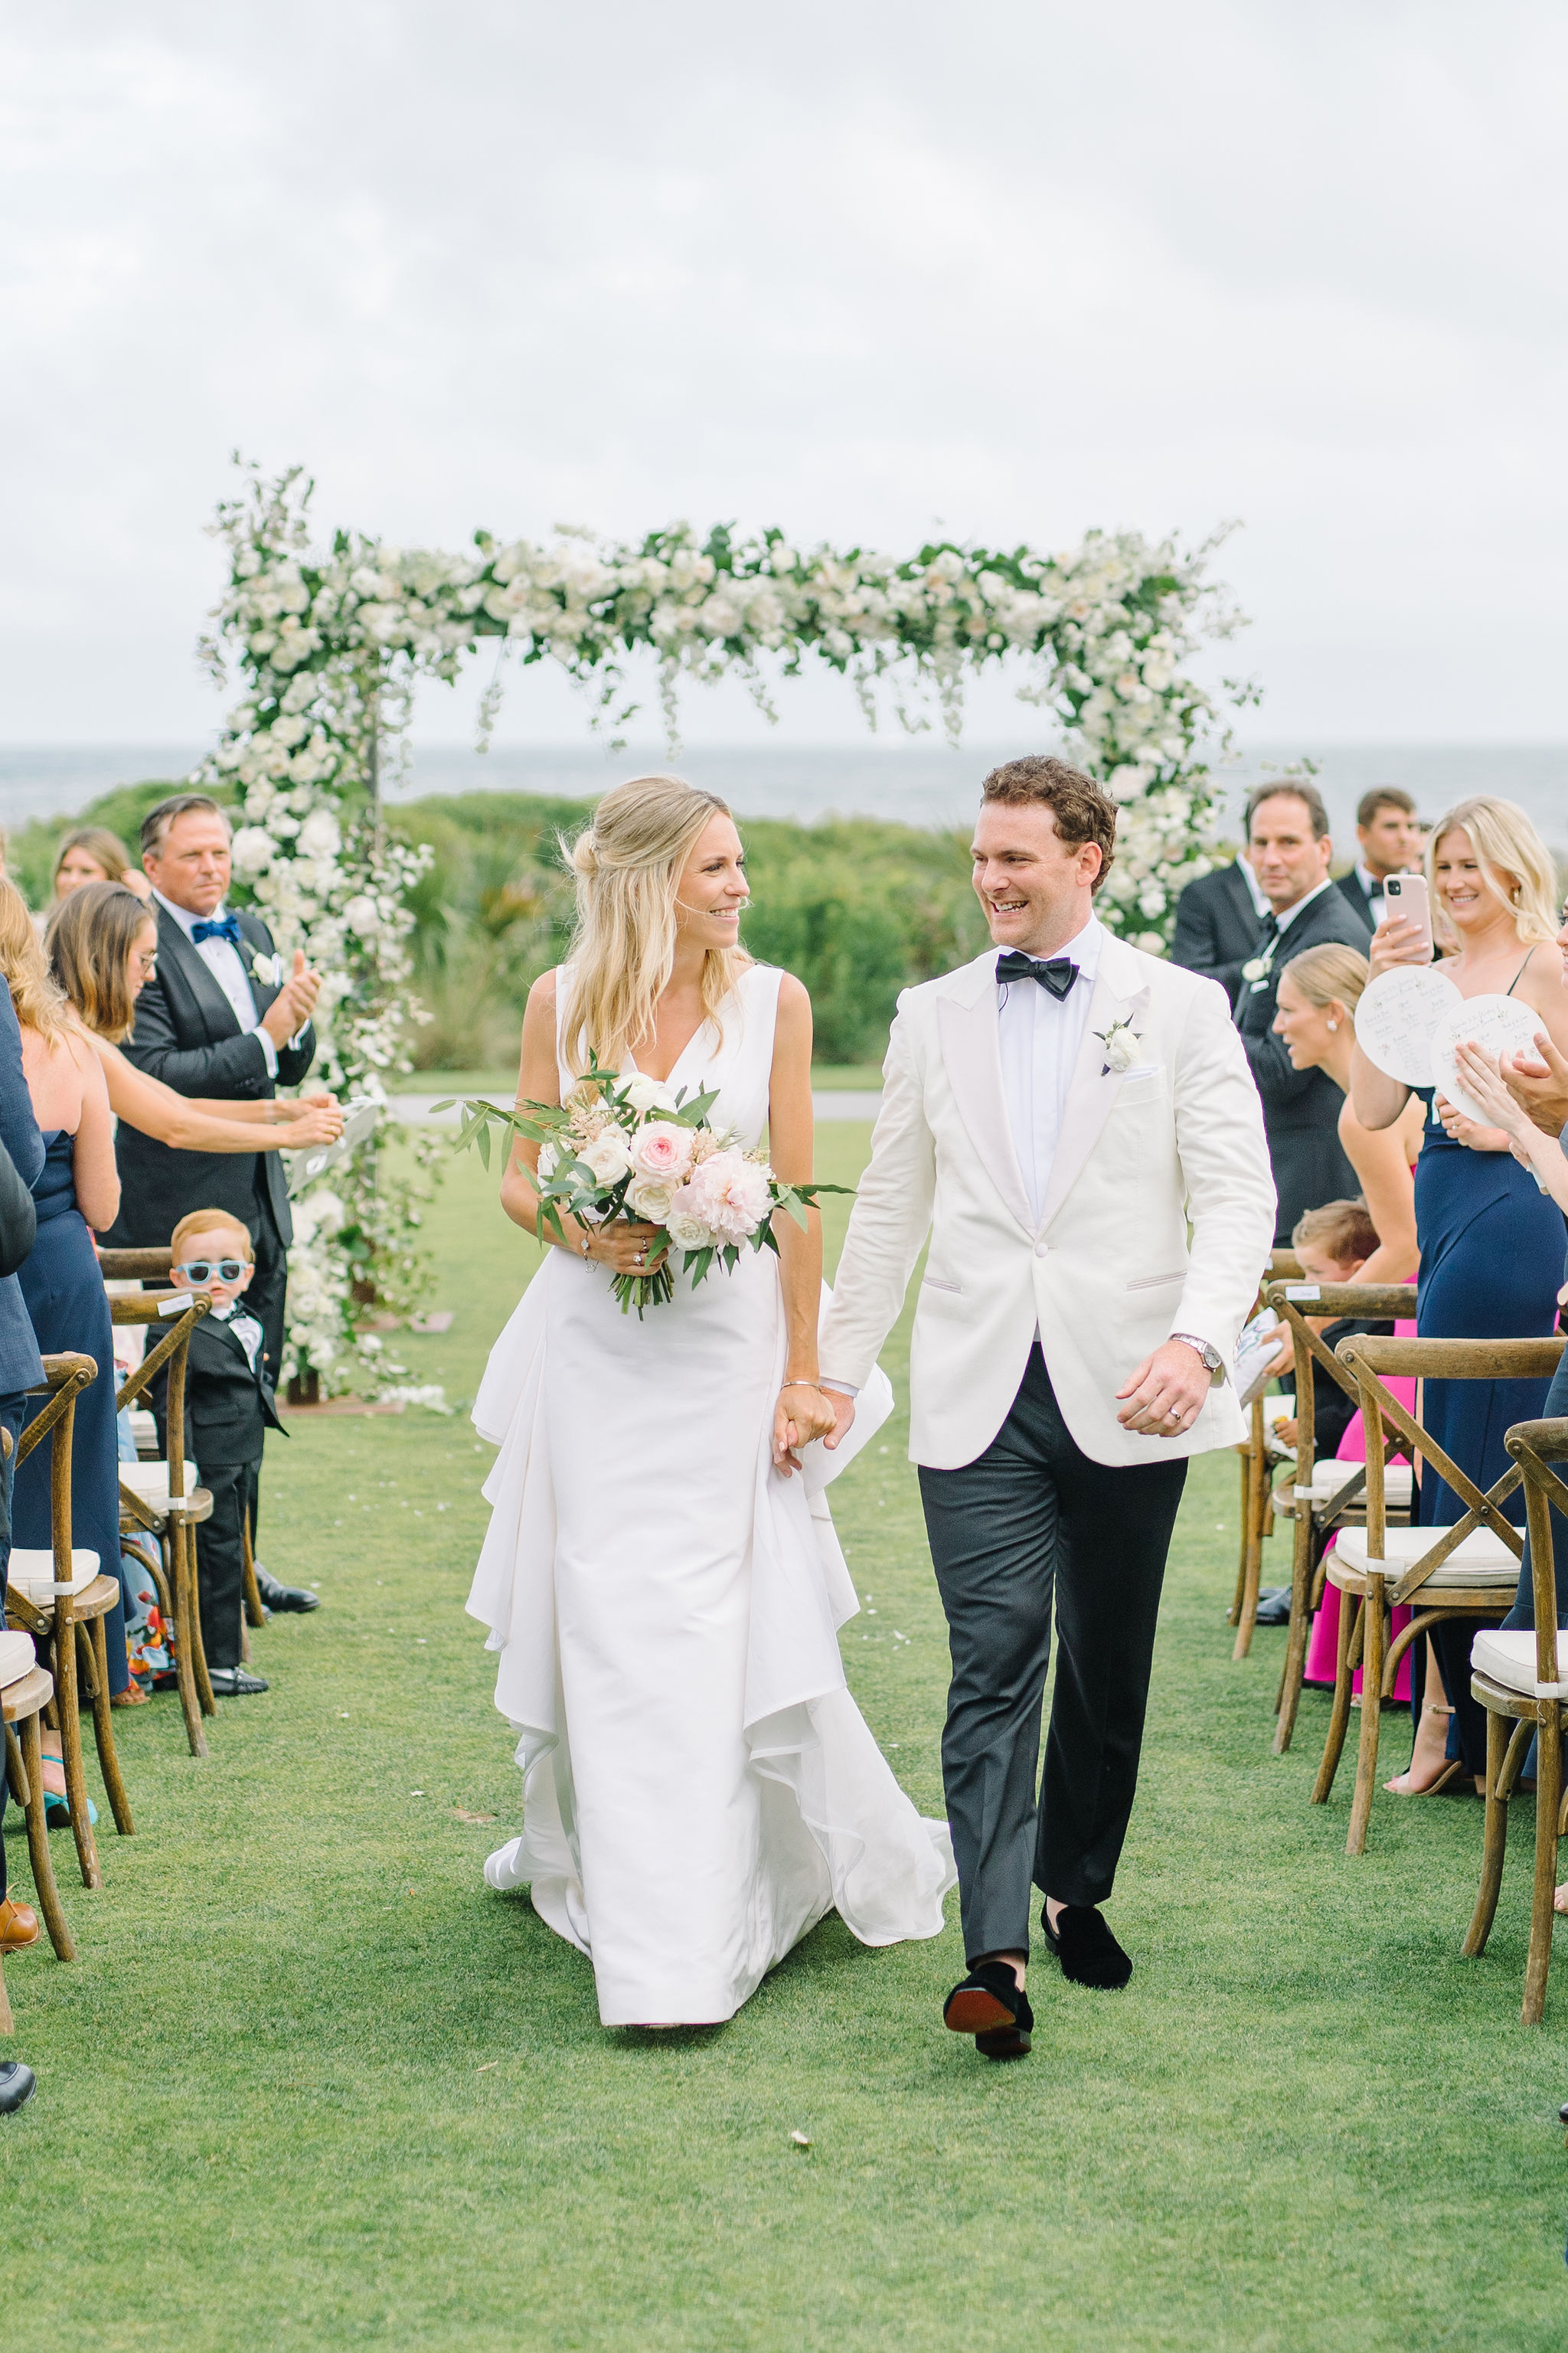 Loverly - A Whimsical Spring Wedding at Kiawah Island Sanctuary Hotel ...